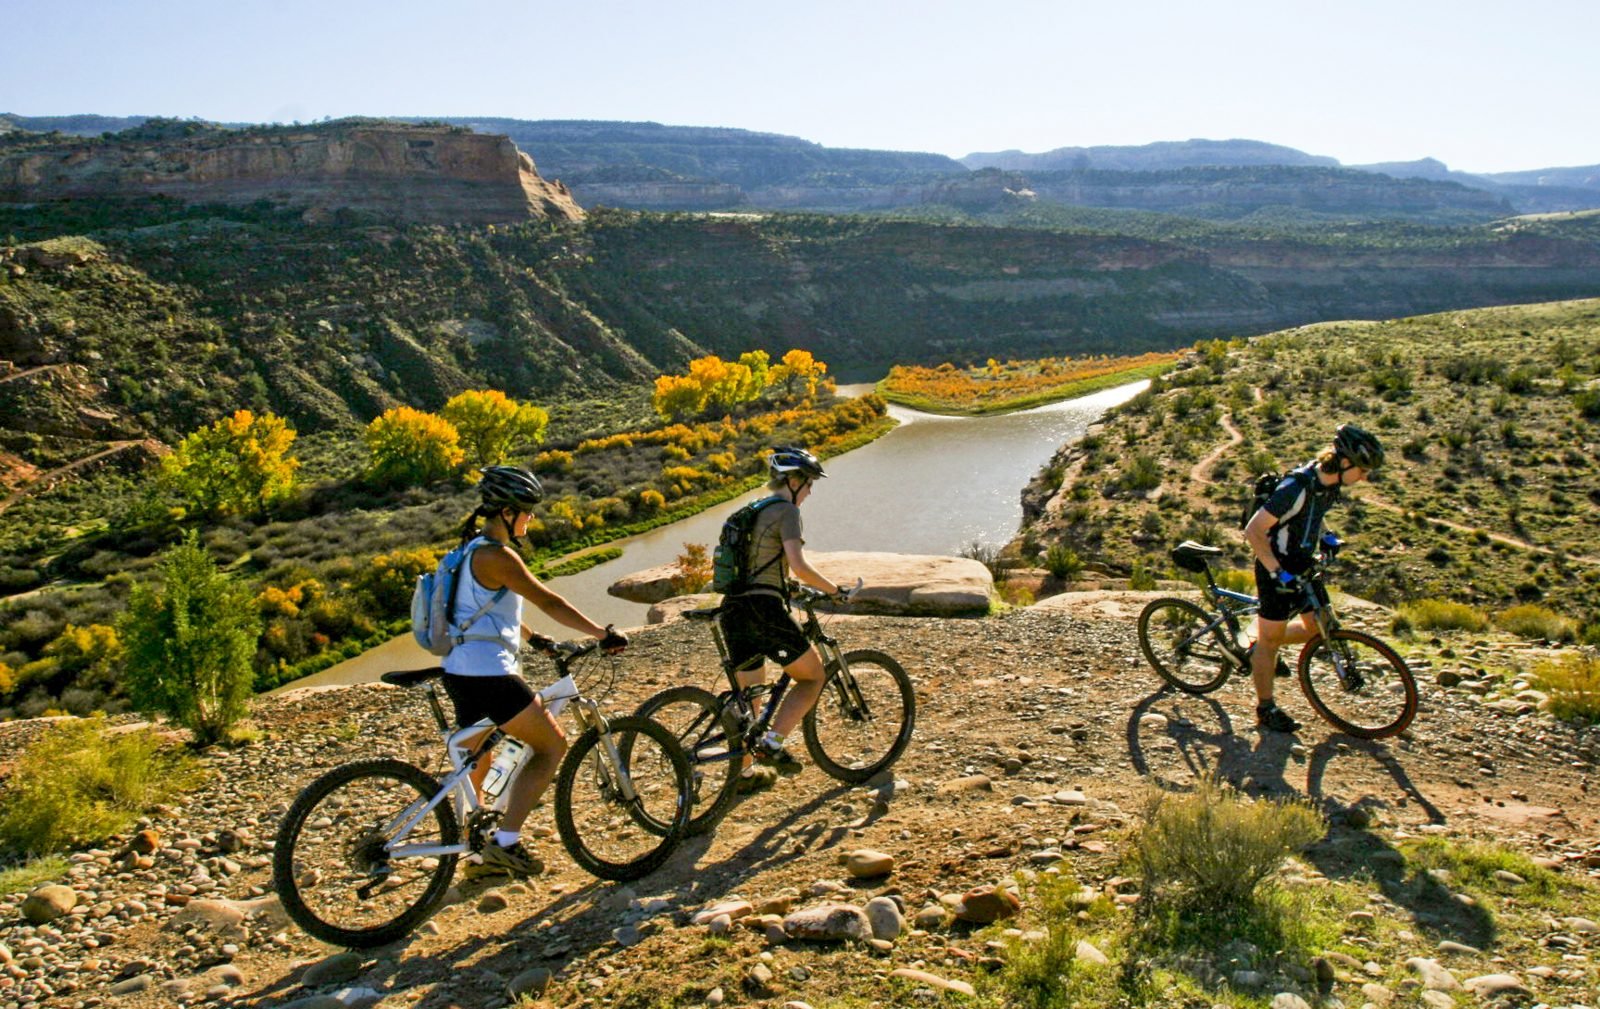 Mountain biking with friends on Colorado's Western Slope